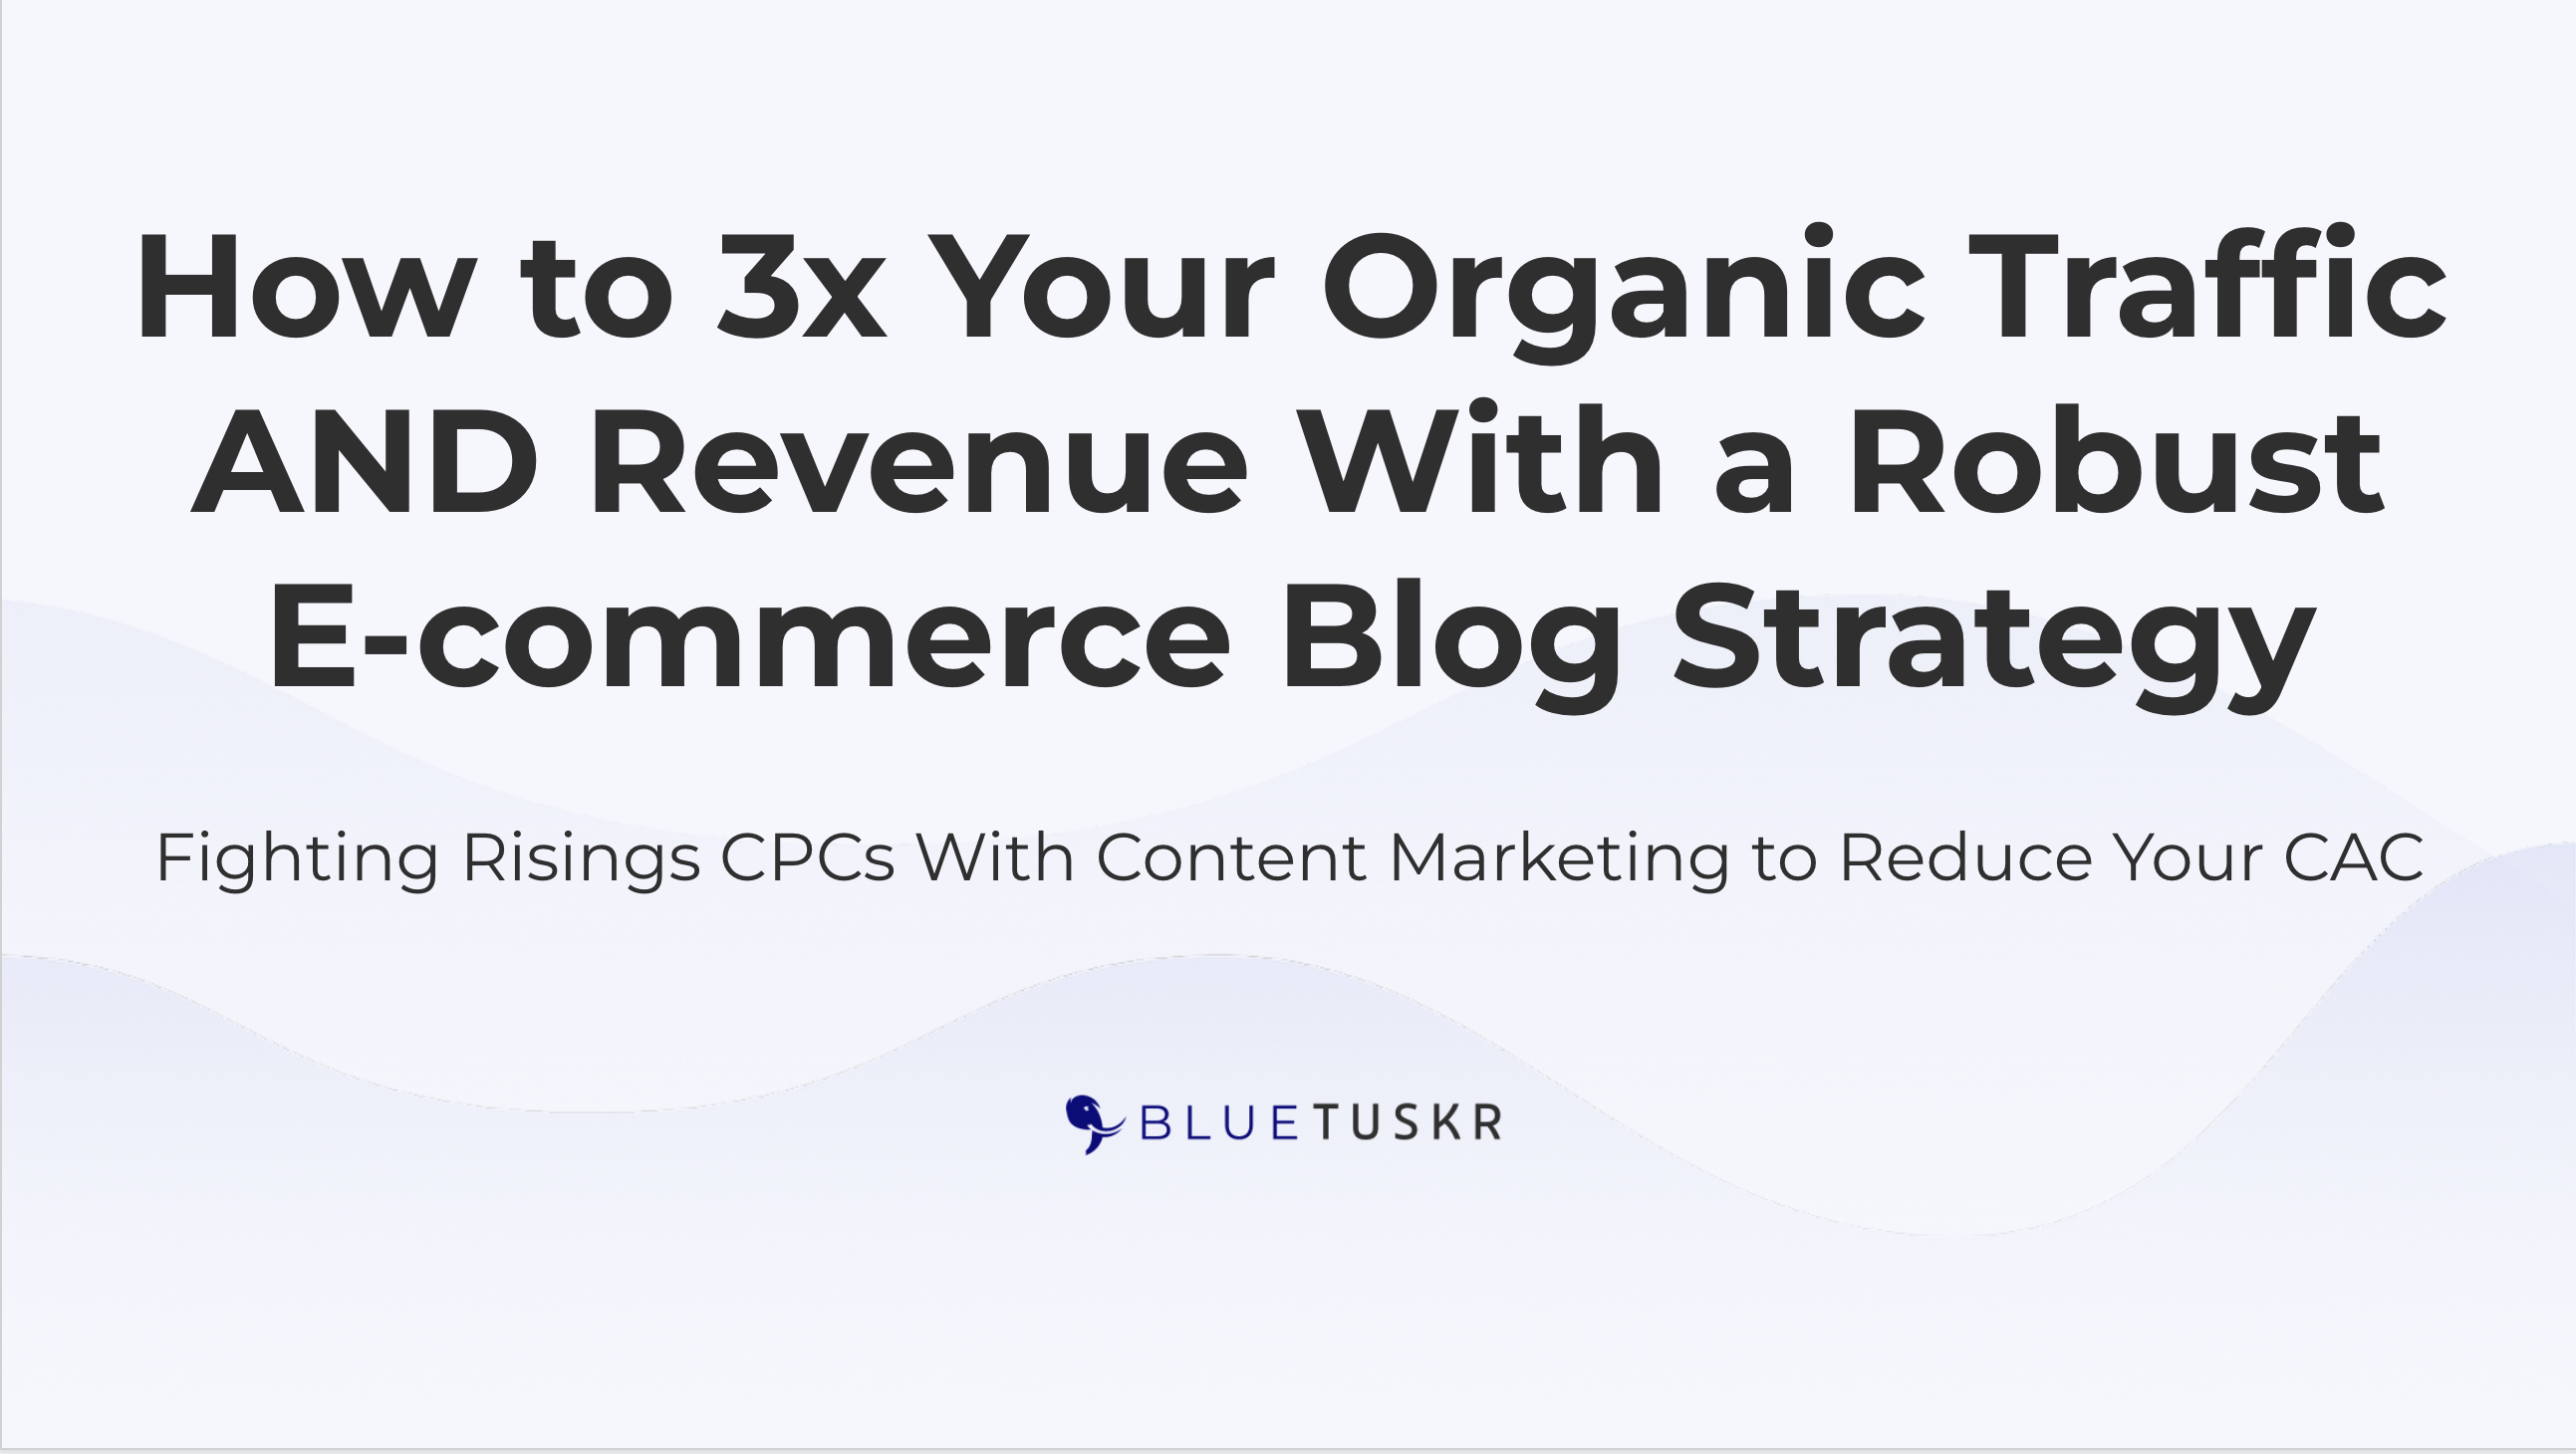 How to 3x Your Organic Traffic AND Revenue ​​​​​​​With a Robust E-commerce Blog Strategy, Online Event